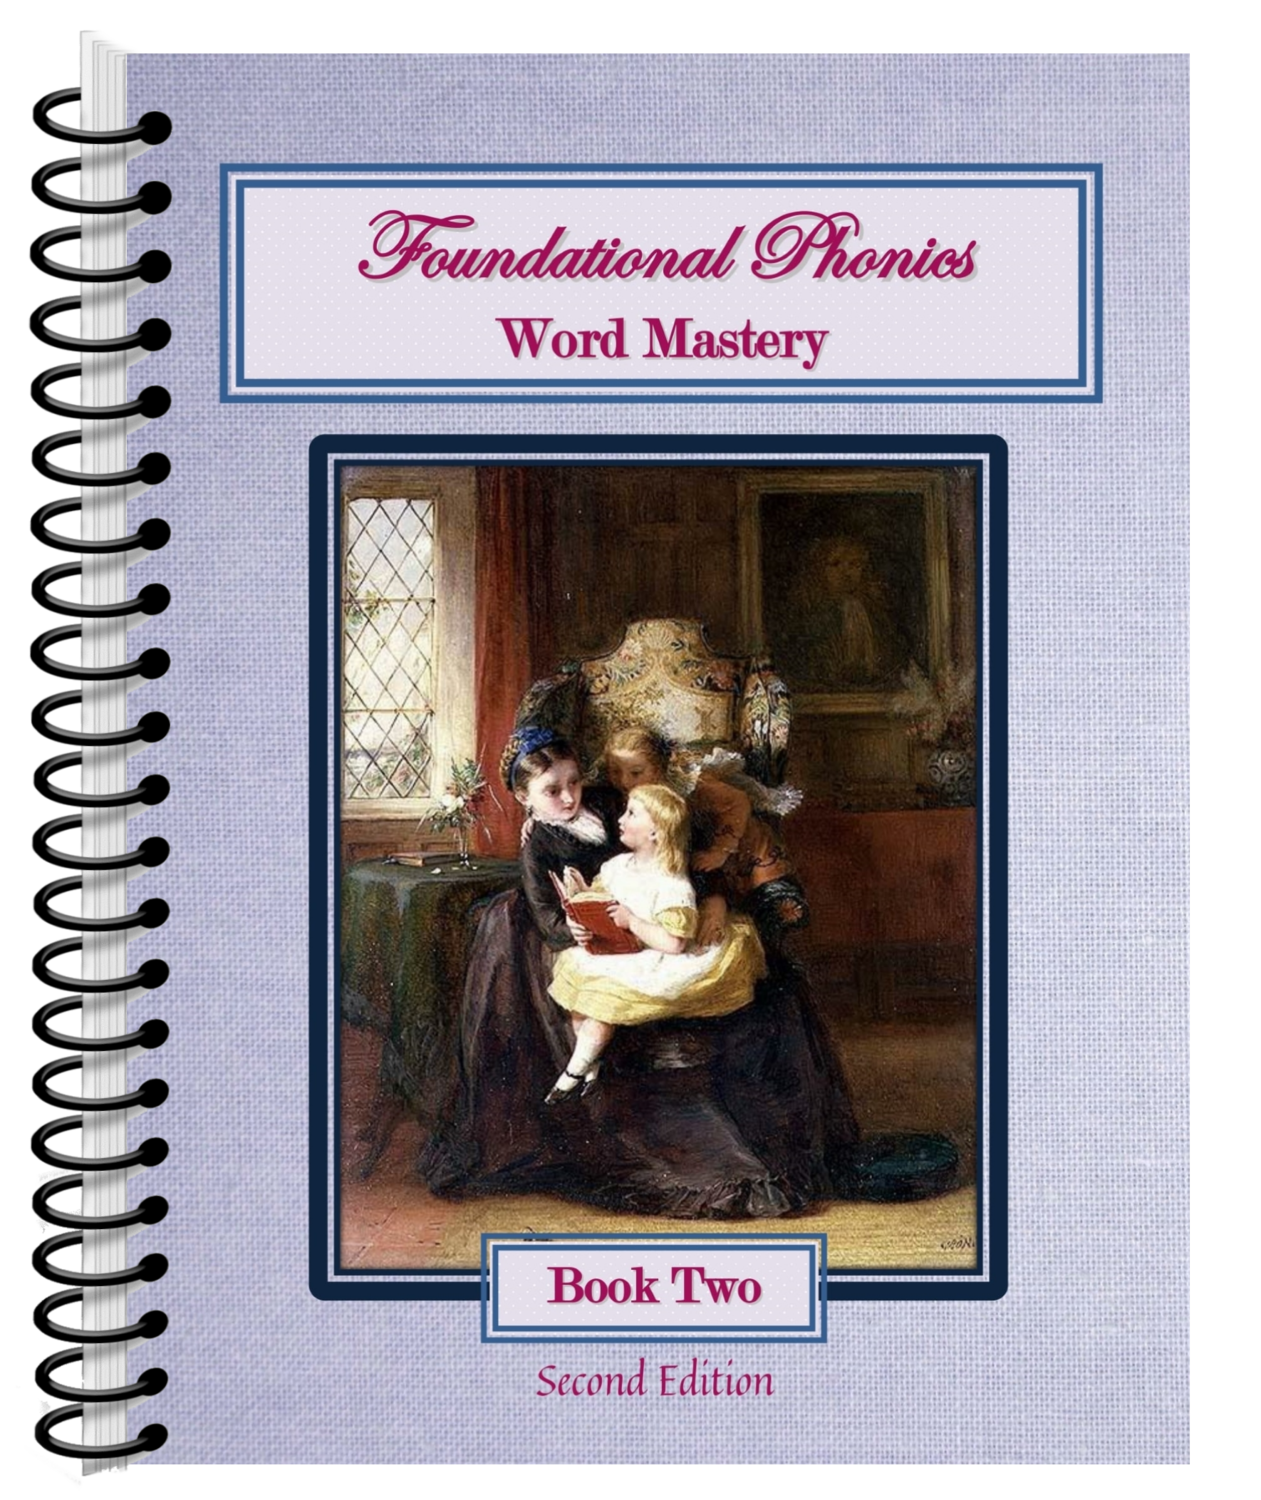 Word Mastery - Book Two